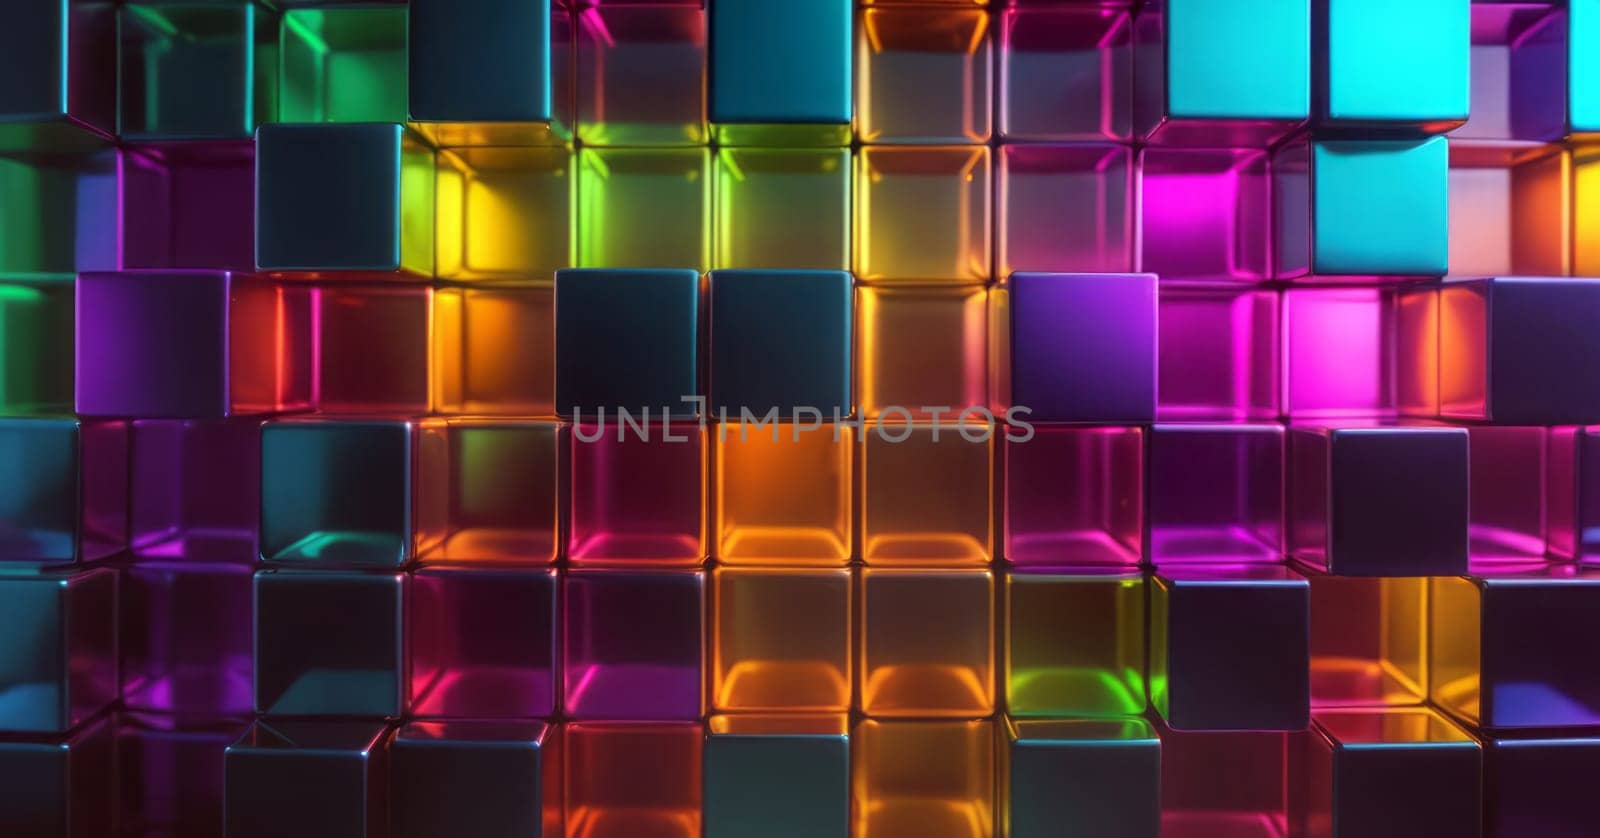 The image displays a series of colorful, illuminated cubes arranged next to each other. Each cube glows with a different color, including shades of blue, green, yellow, orange, red, and purple. The lighting creates a reflective surface on the cubes giving them a glossy appearance. The colors are vibrant and create a visually stimulating pattern across the entire image. Generative AI